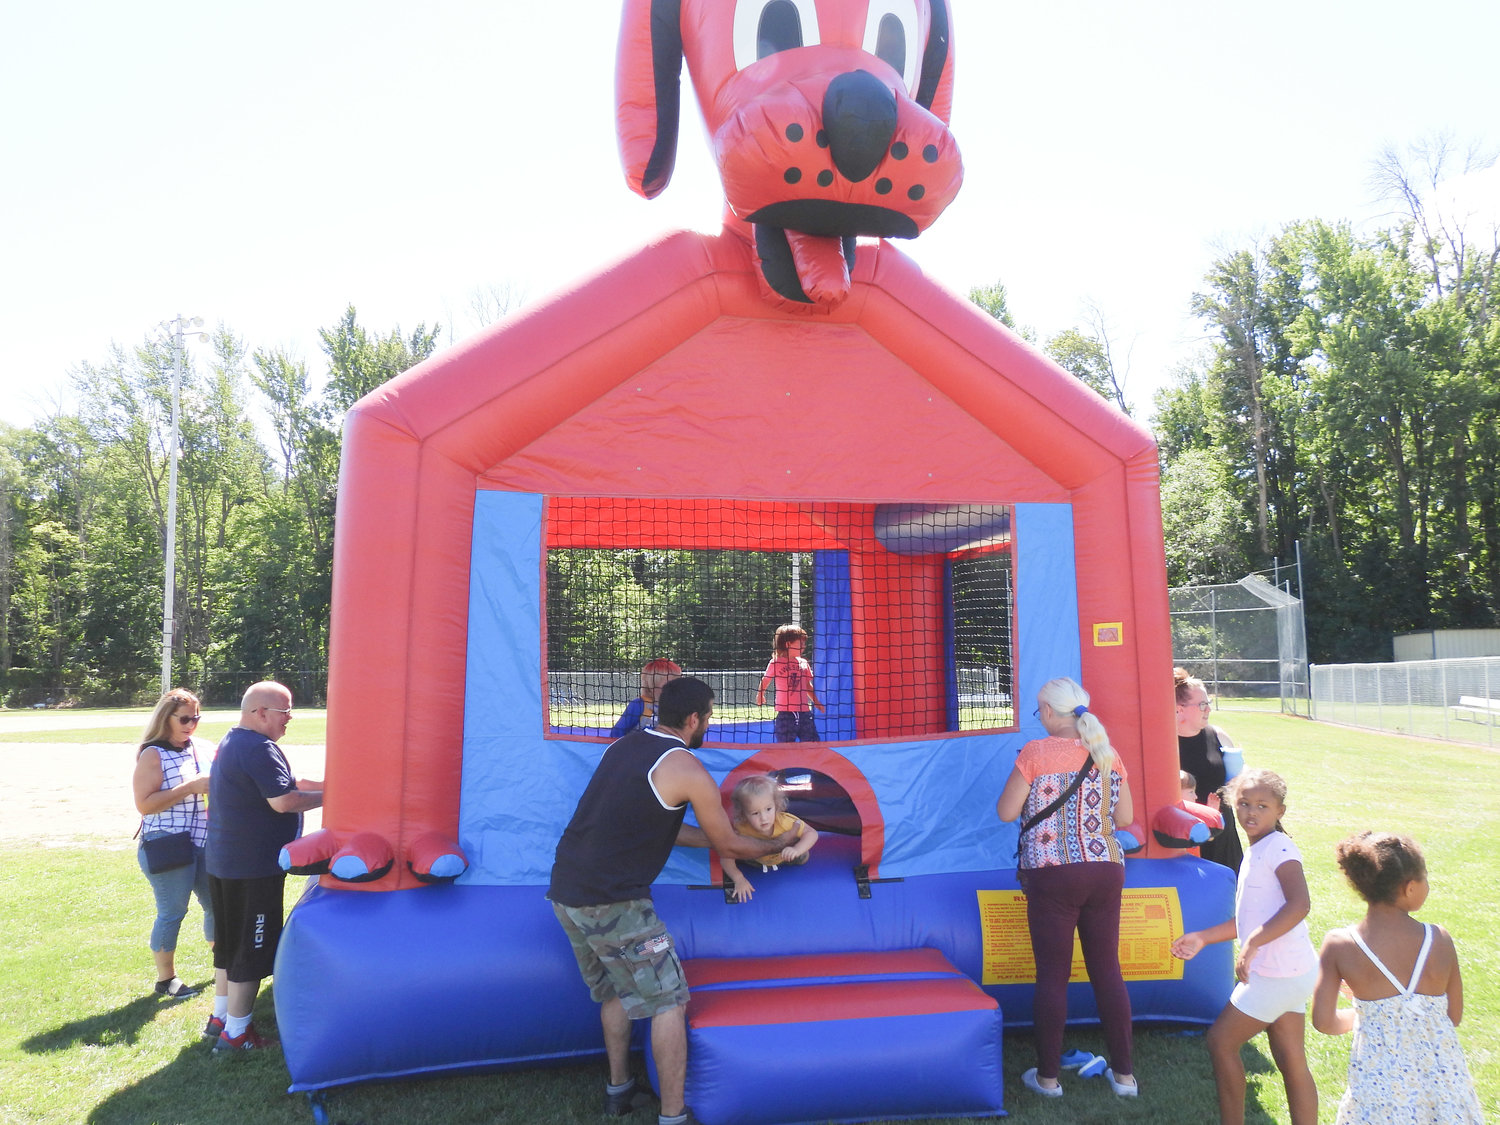 Local residents enjoy a day of fun at Wanderers' Rest's 2022 Woofstock fundraiser in Oneida on Saturday, Aug. 13.